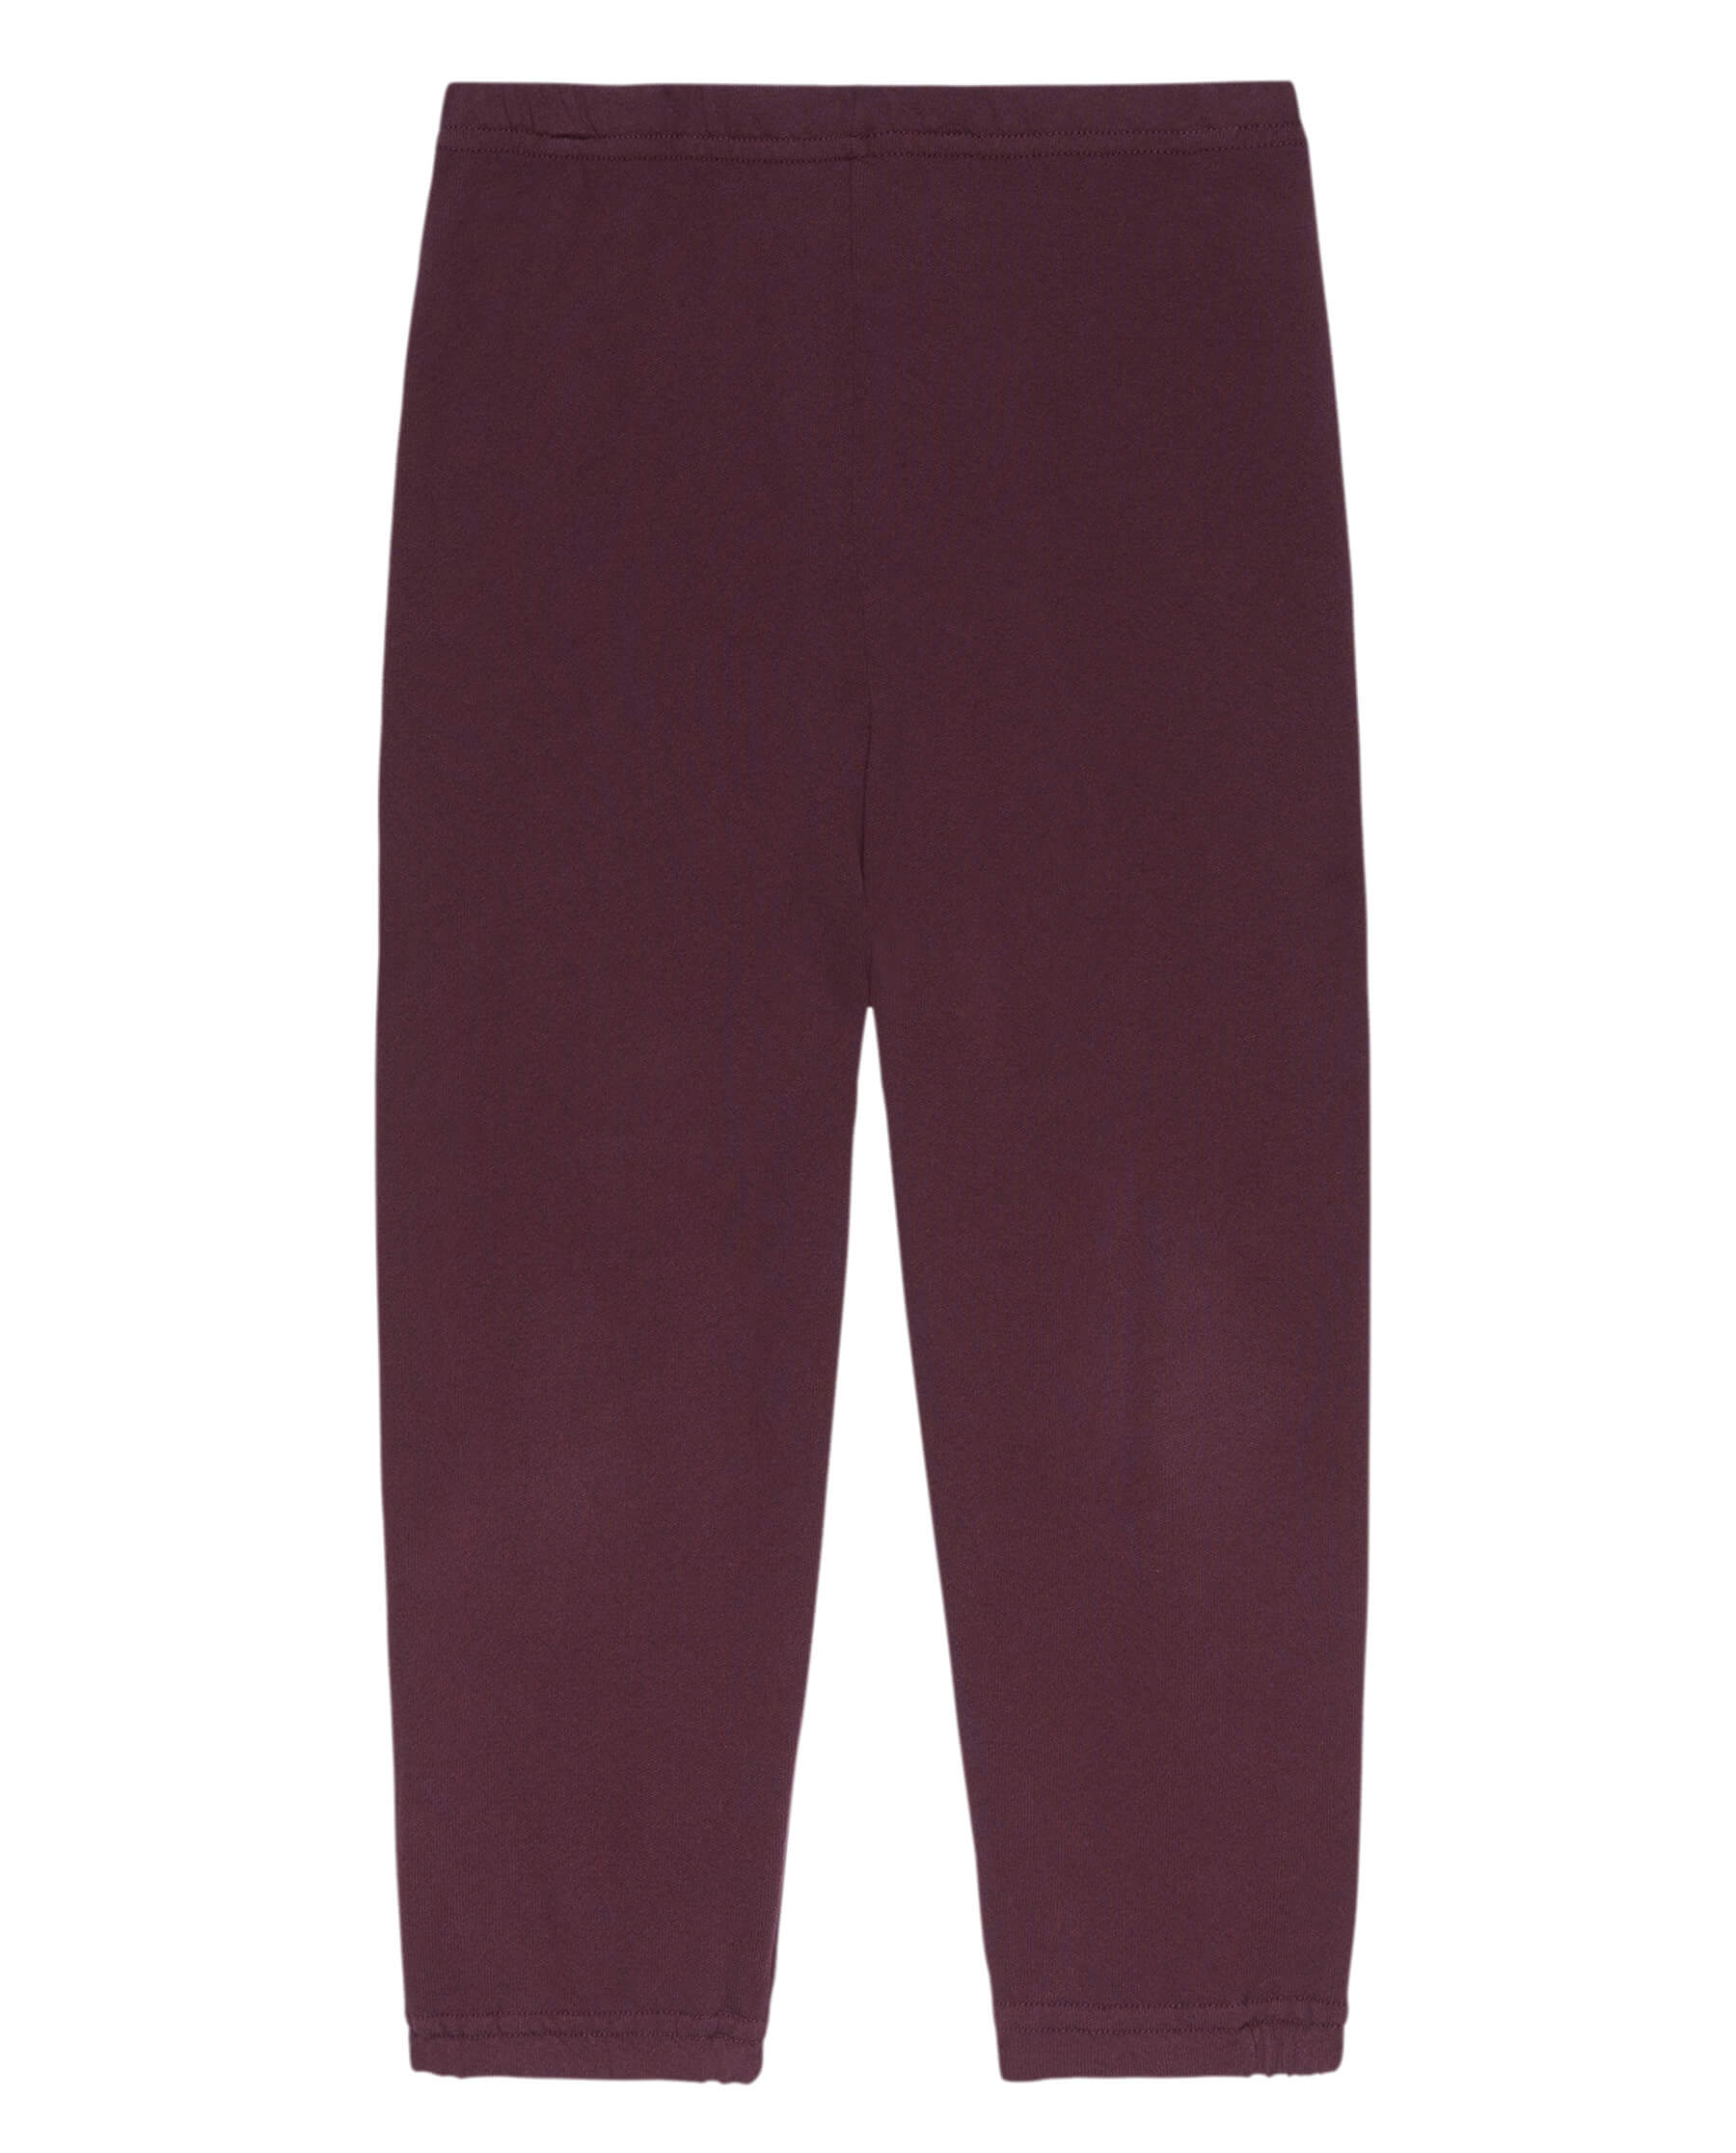 The Little Stadium Sweatpant. Solid -- Mulled Wine SWEATPANTS THE GREAT. HOL 23 LITTLE